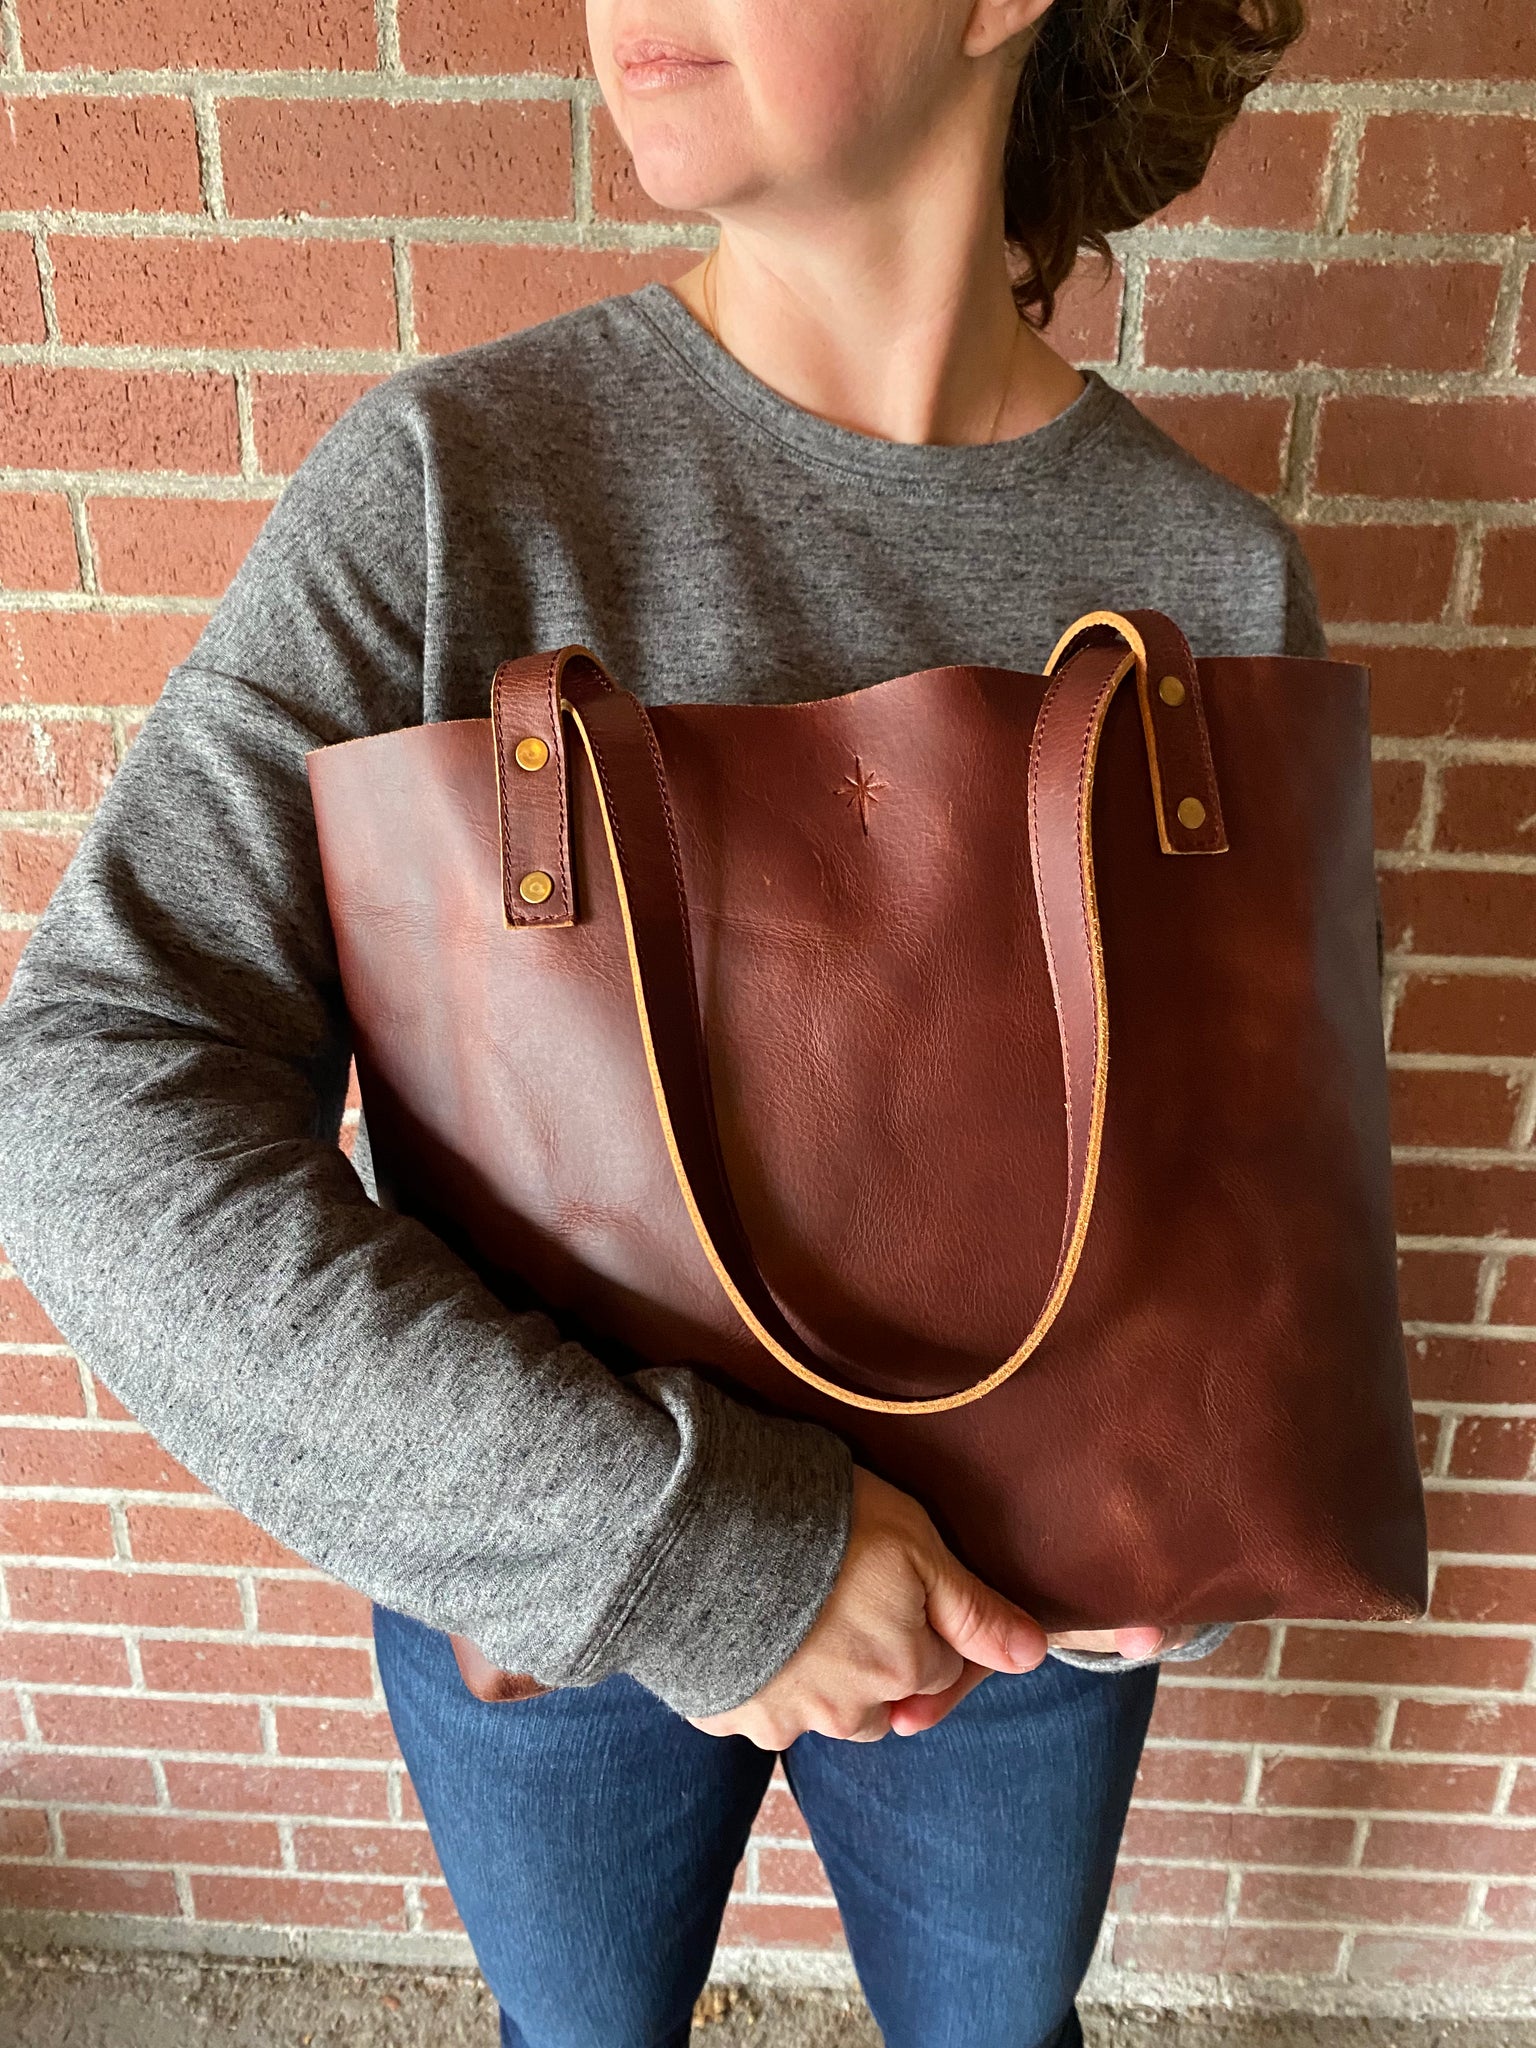 Girl holding brown leather tote bag